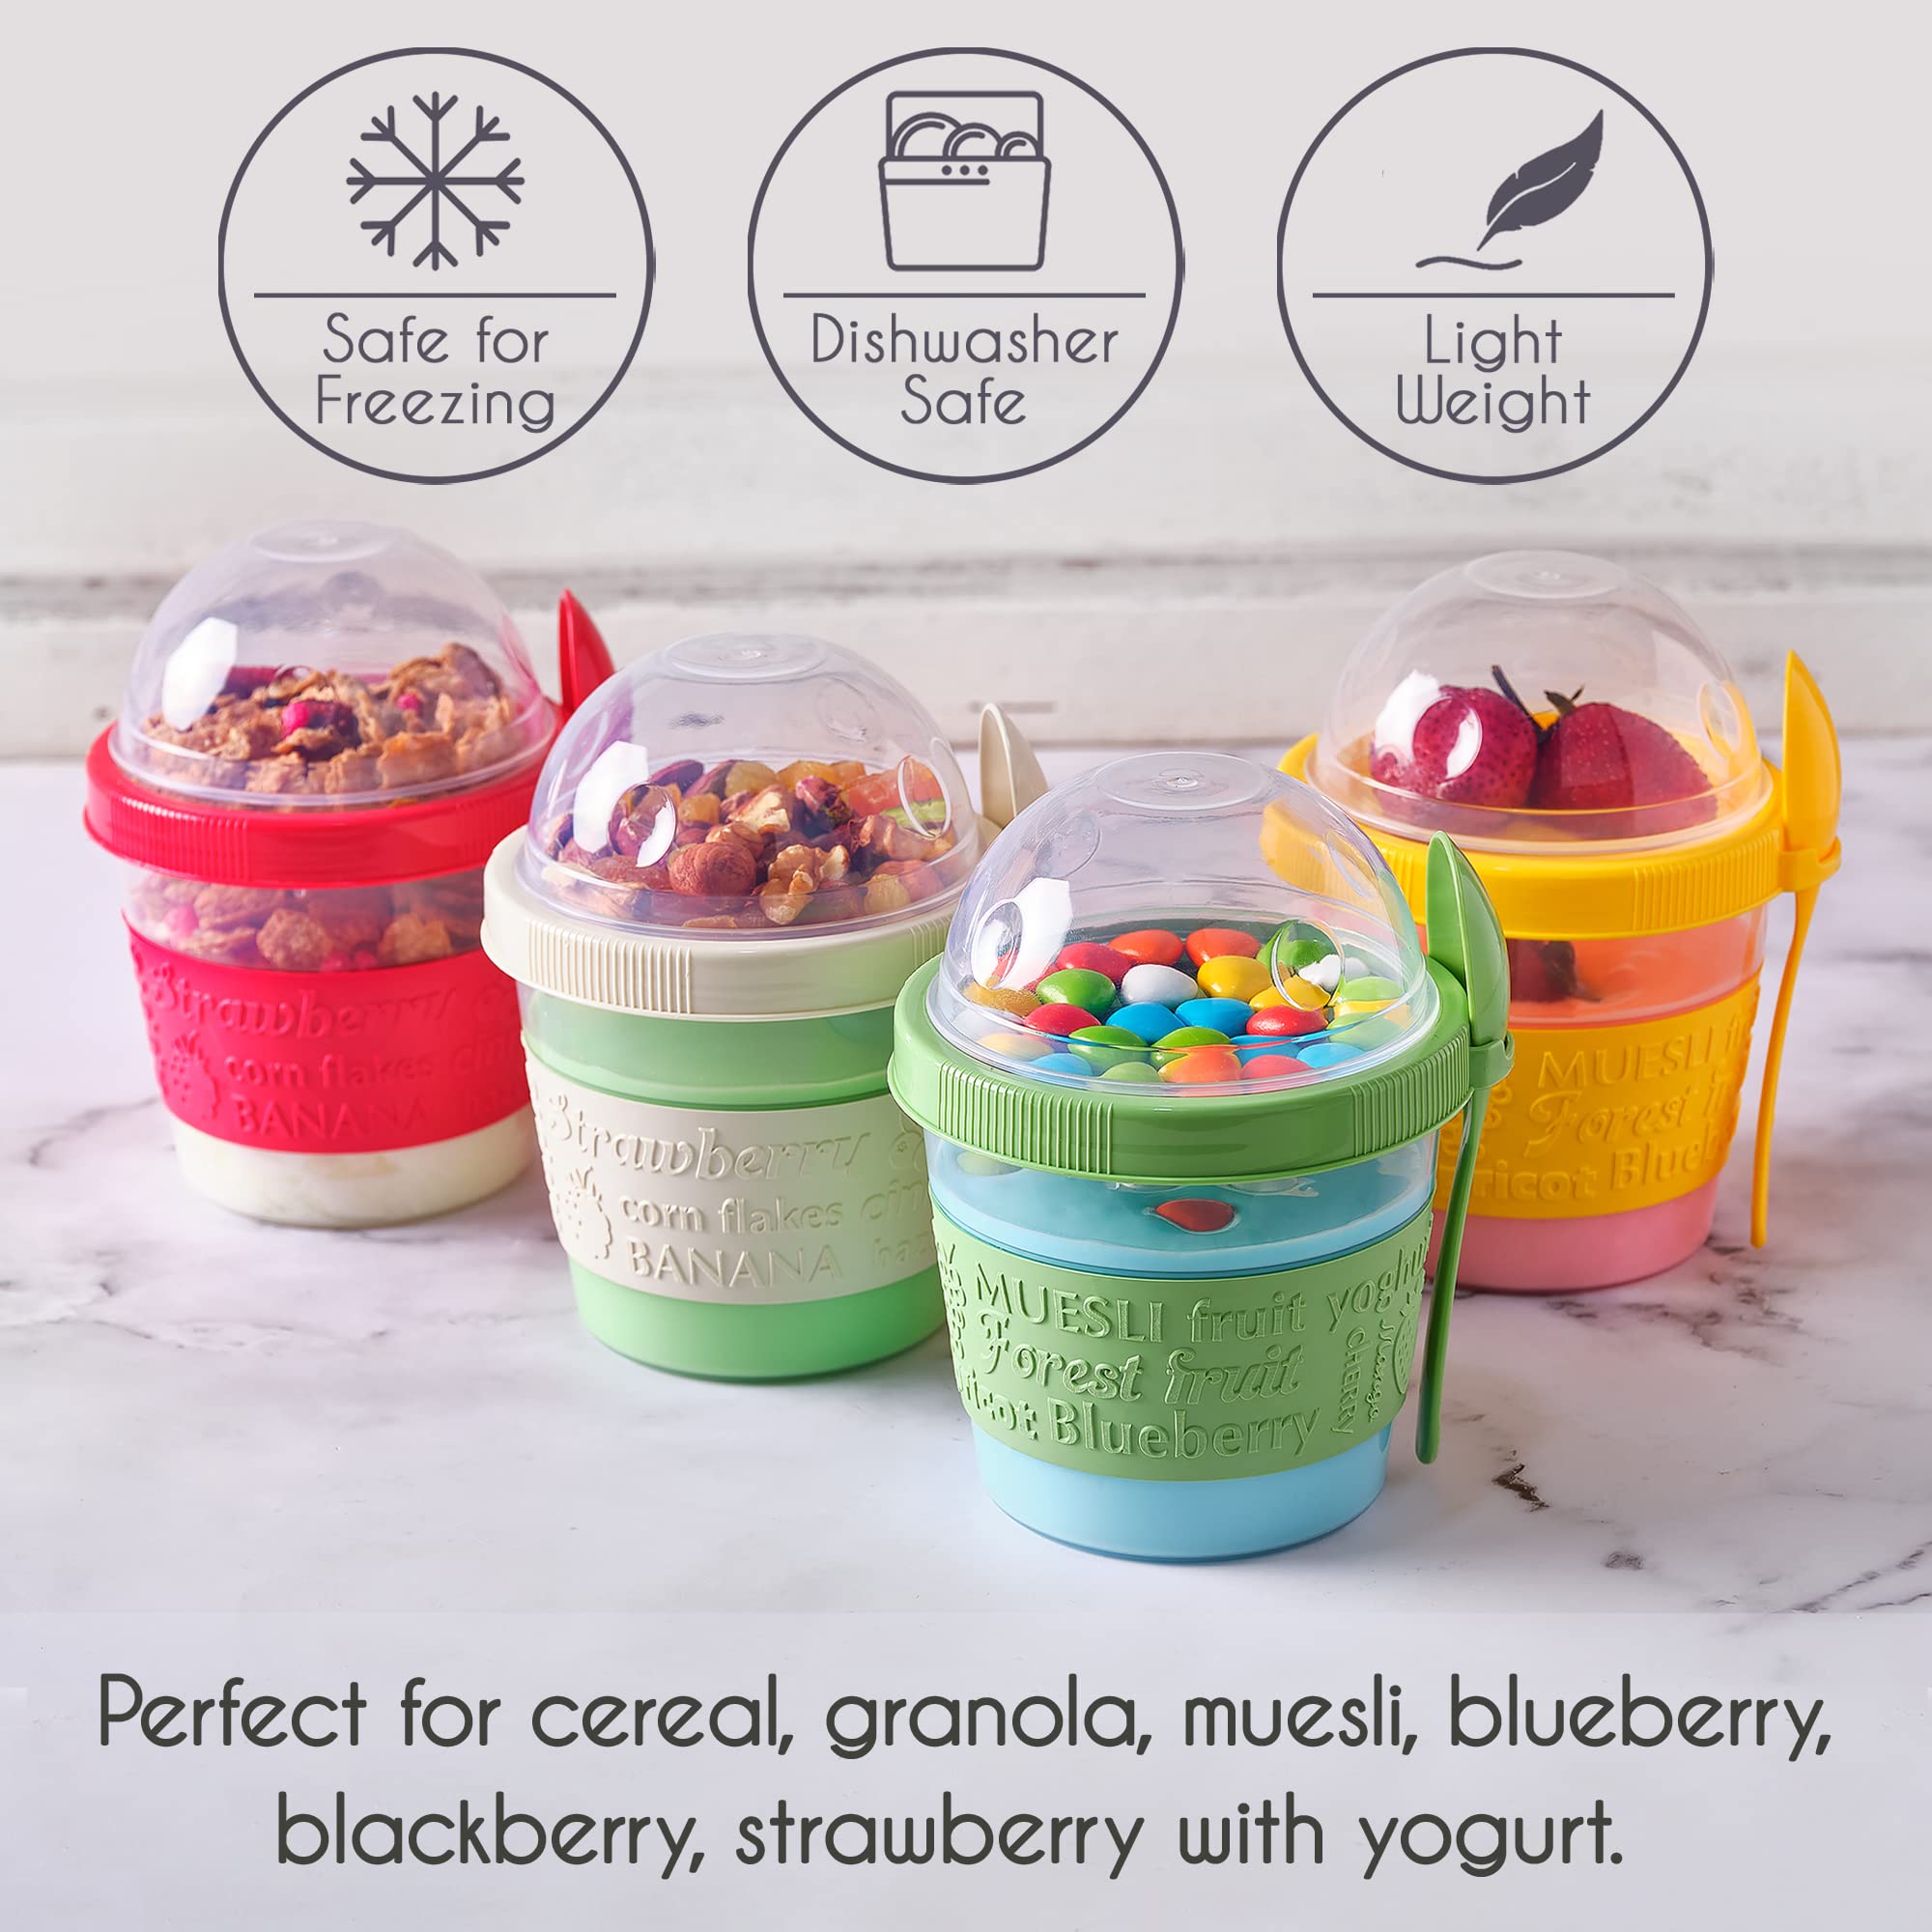 Crystalia Yogurt Parfait Cups with Lids, Mini Breakfast On the Go Plastic Bowls with Topping Cereal Oatmeal Container with Spoon for Lunch Box, Portable & Reusable, Colorful Set of 4 (Small 17 oz)